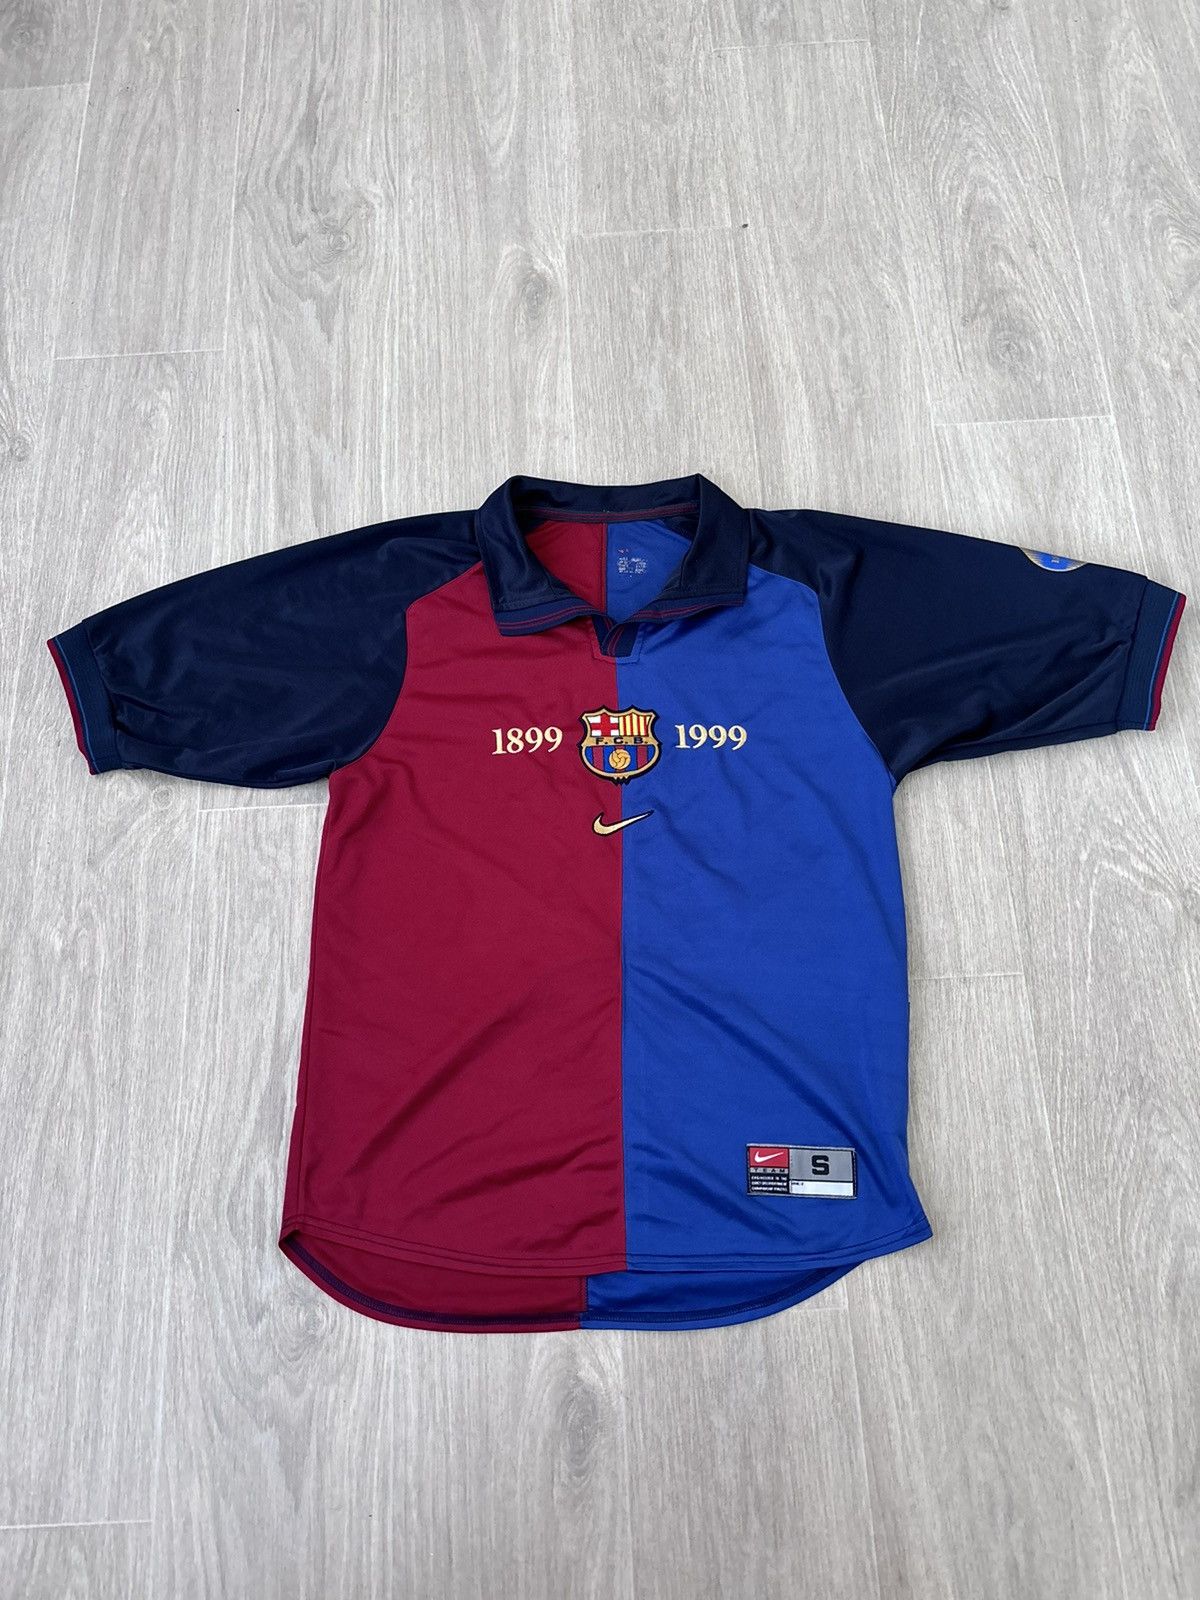 Pre-owned F C Barcelona X Nike Vintage Nike X Barcelona 1999 Soccer Jersey Very In Red